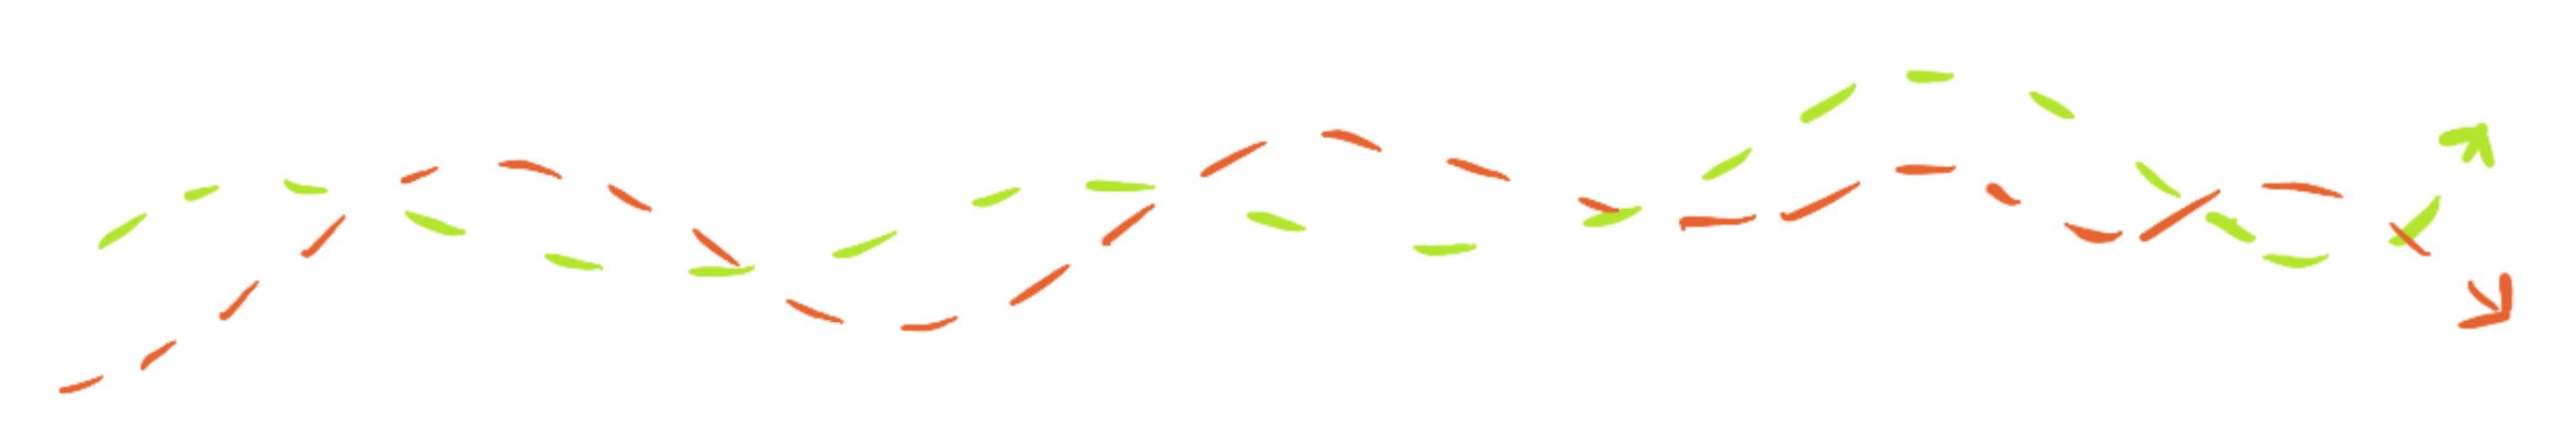 Two long wavy dashed lines of different colors, overlapping one another. Each one ends in an arrow that points to the right.